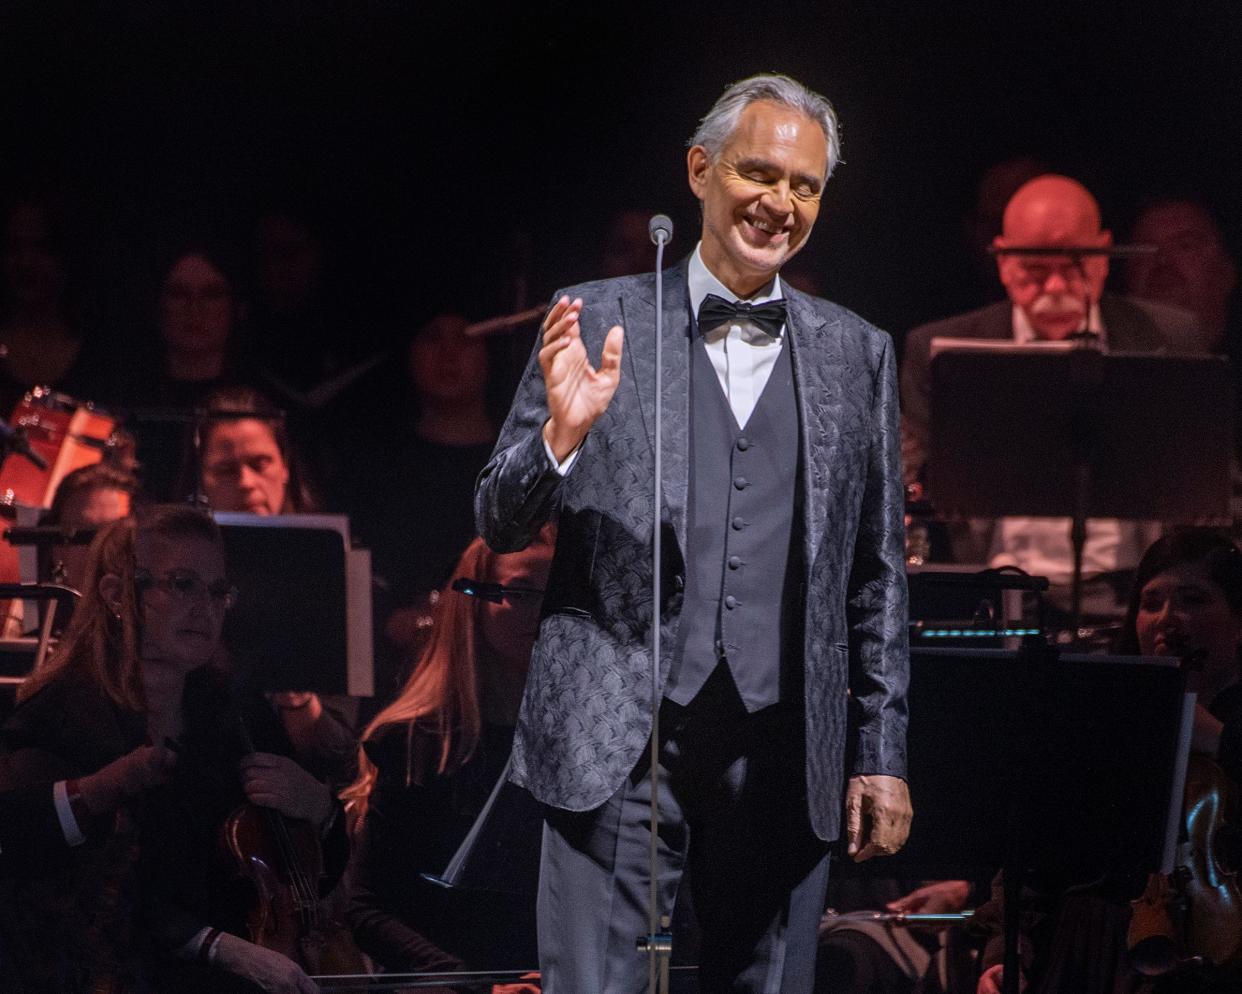 Andrea Bocelli amazed at PPG Paints Arena on Thursday.